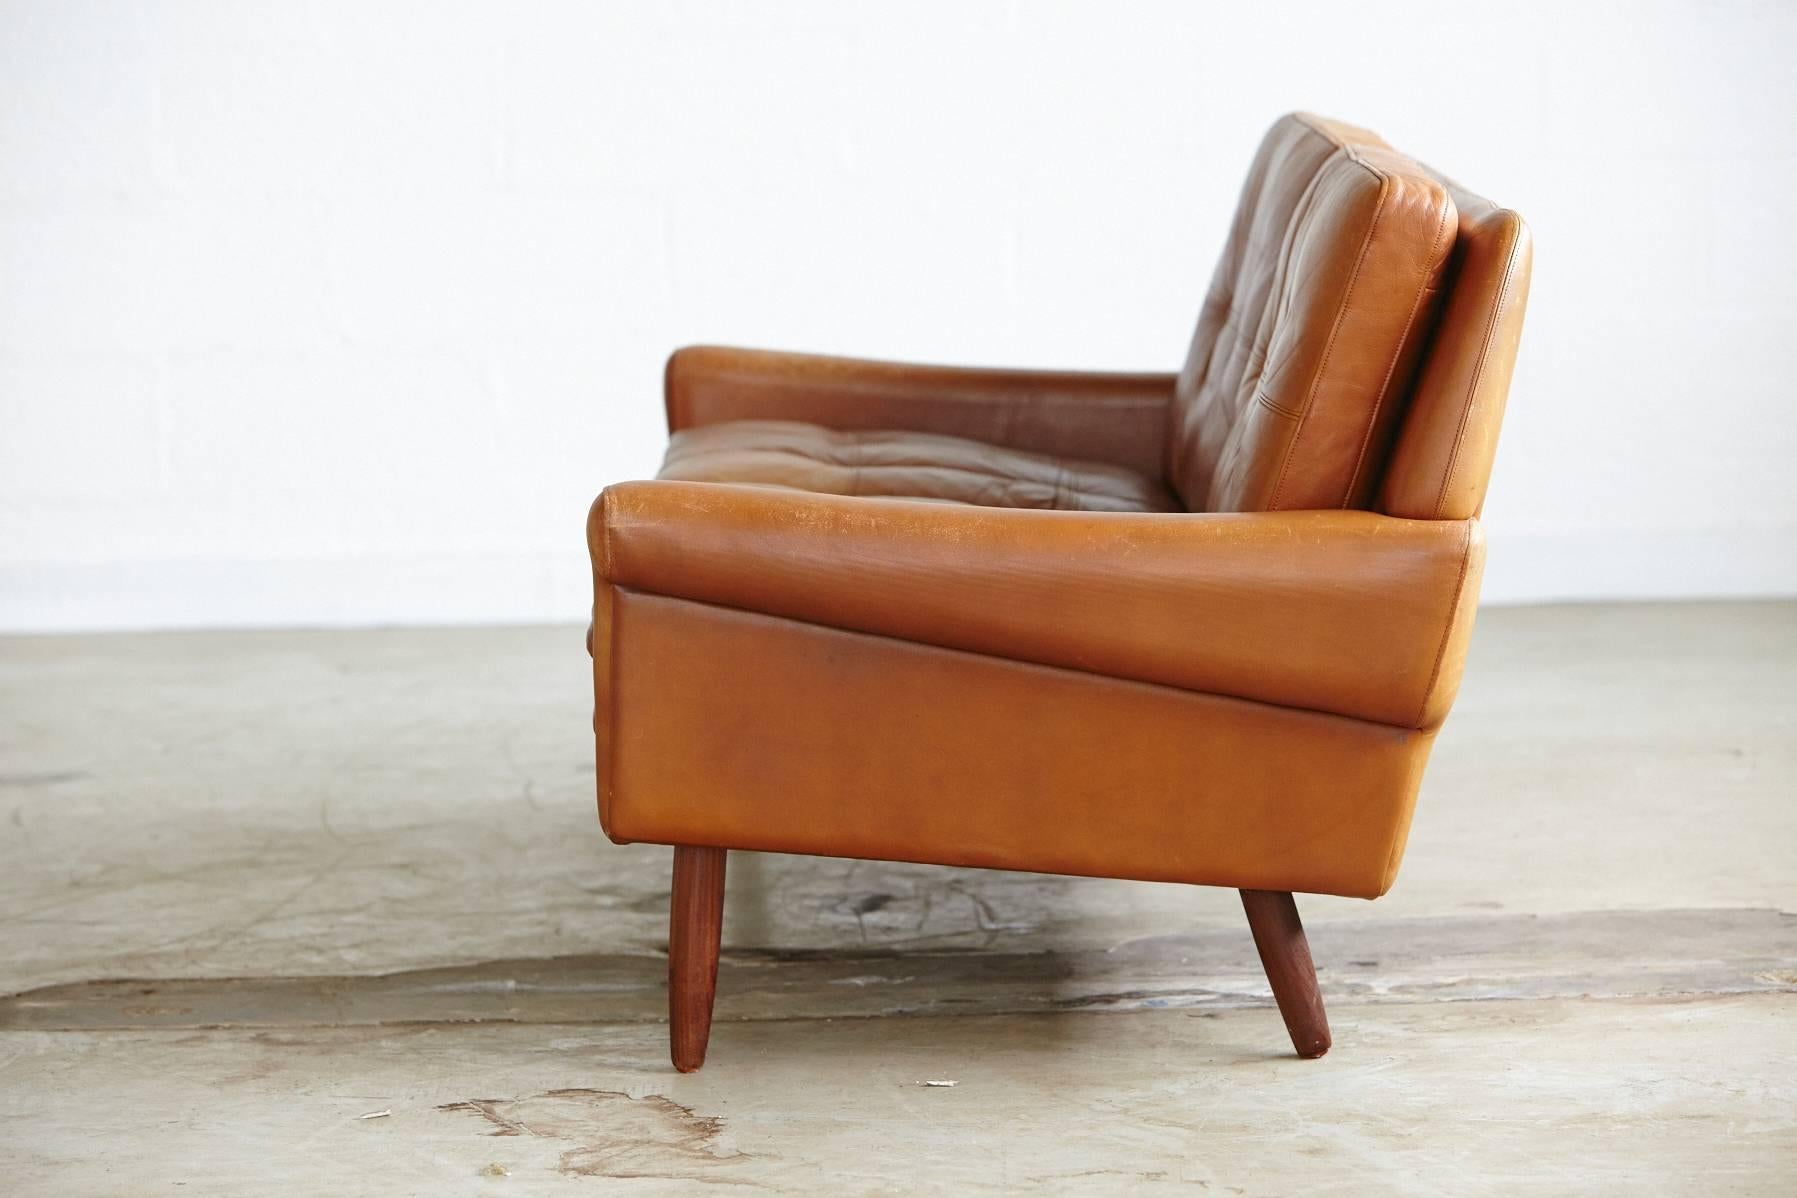 Stained Two-Seat Danish Leather Sofa by Svend Skipper from the 1960s